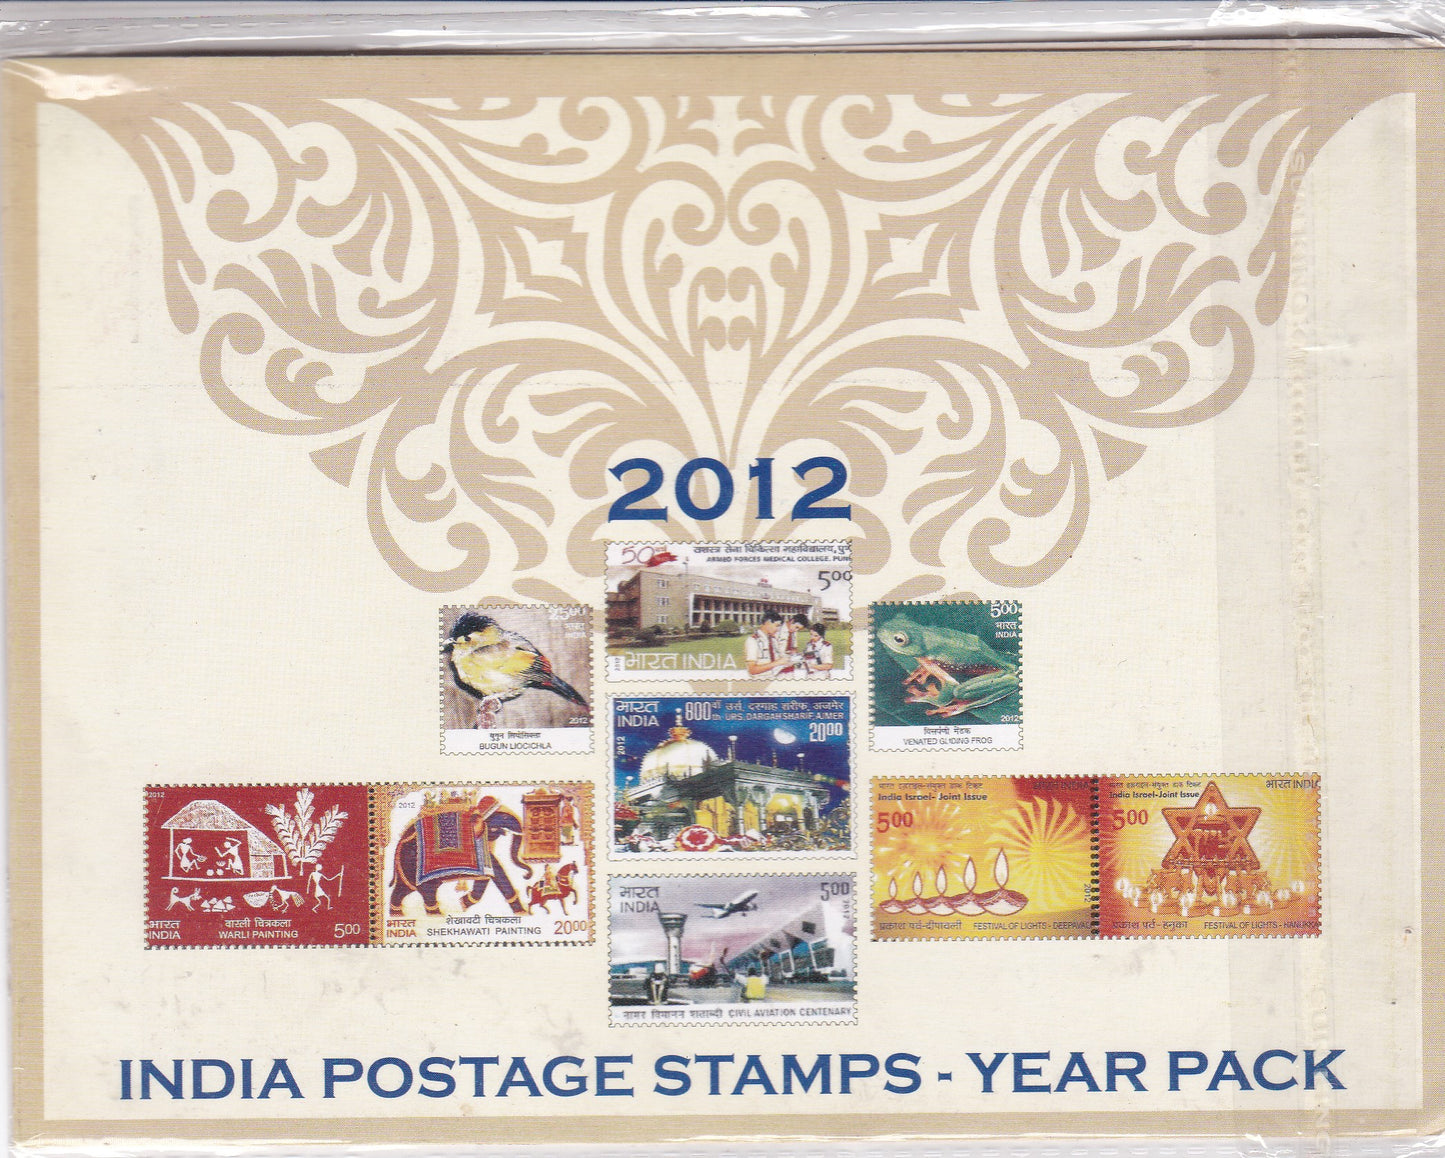 India-Postage Stamps Year Pack-2012